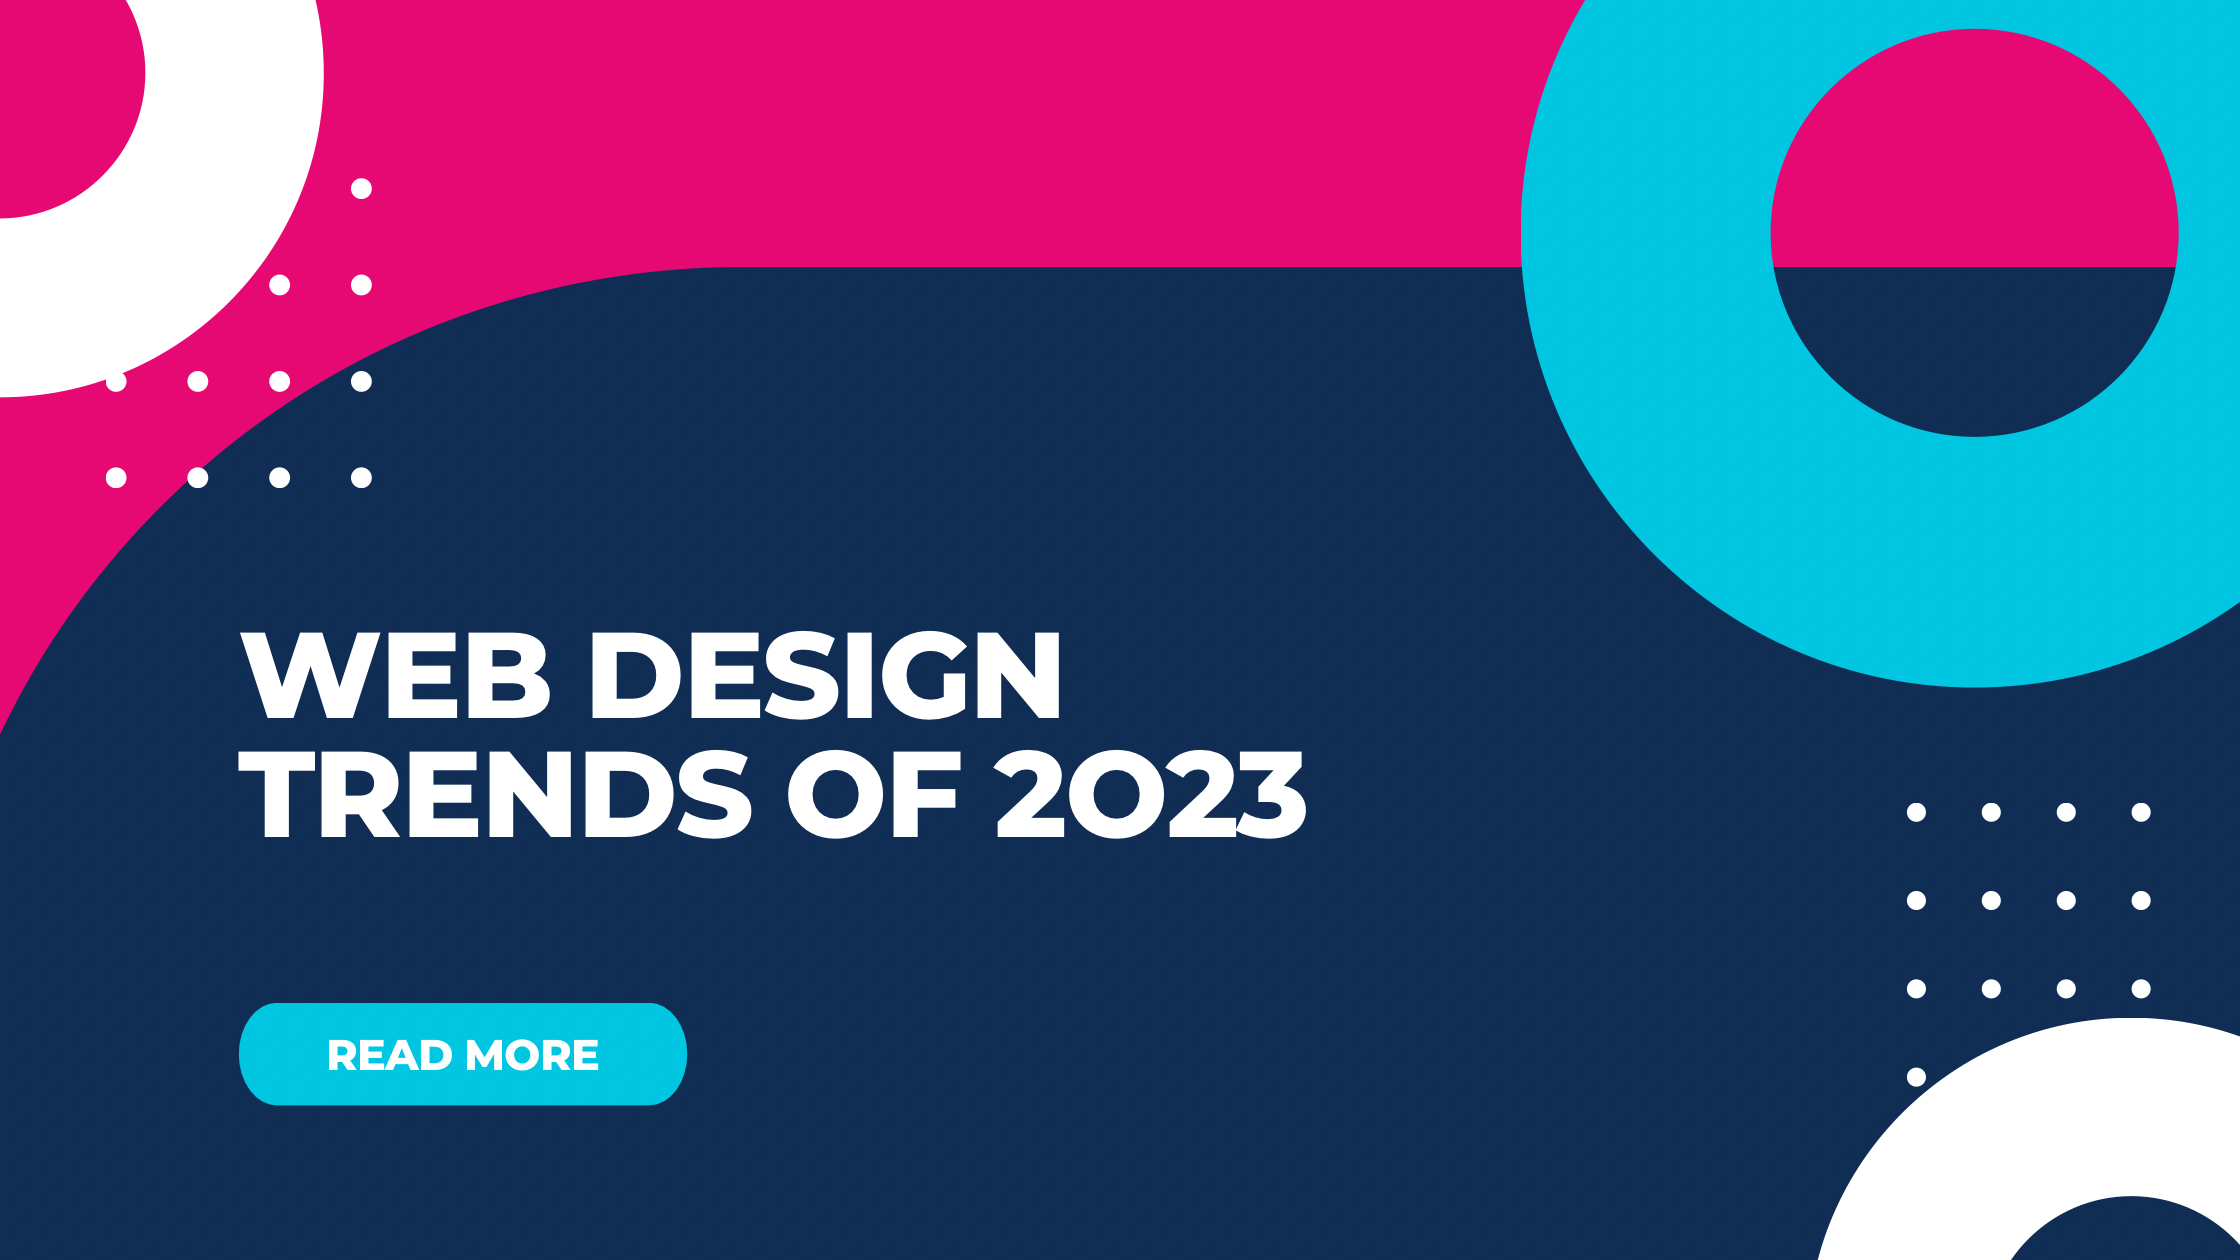 Web Design Trends of 2023 and Beyond